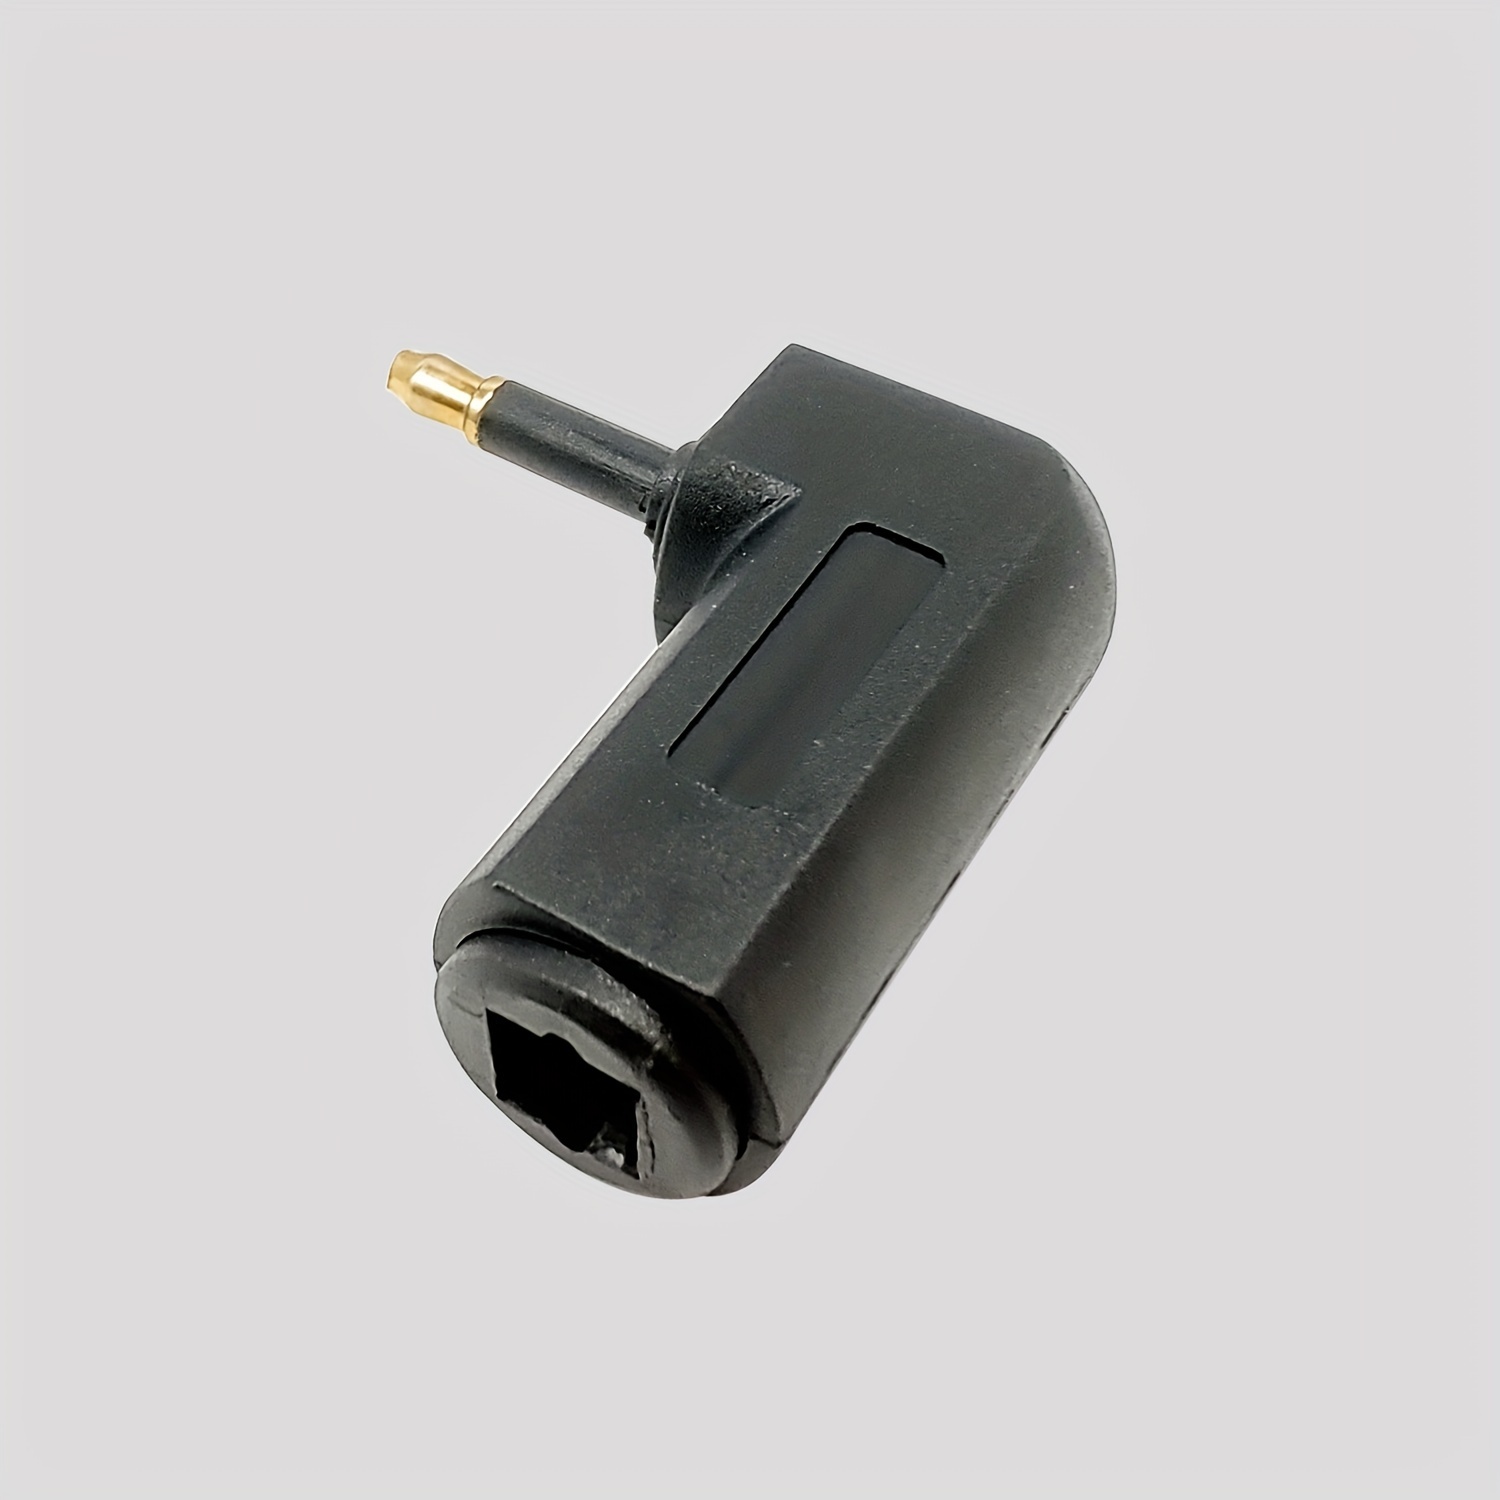  Toslink Connector Optical Audio Adapter Black Mini Toslink  Optical 3.5 mm Female Jack Plug to Digital Toslink Male Audio Adapter for  Excellent Audio Quality : Electronics